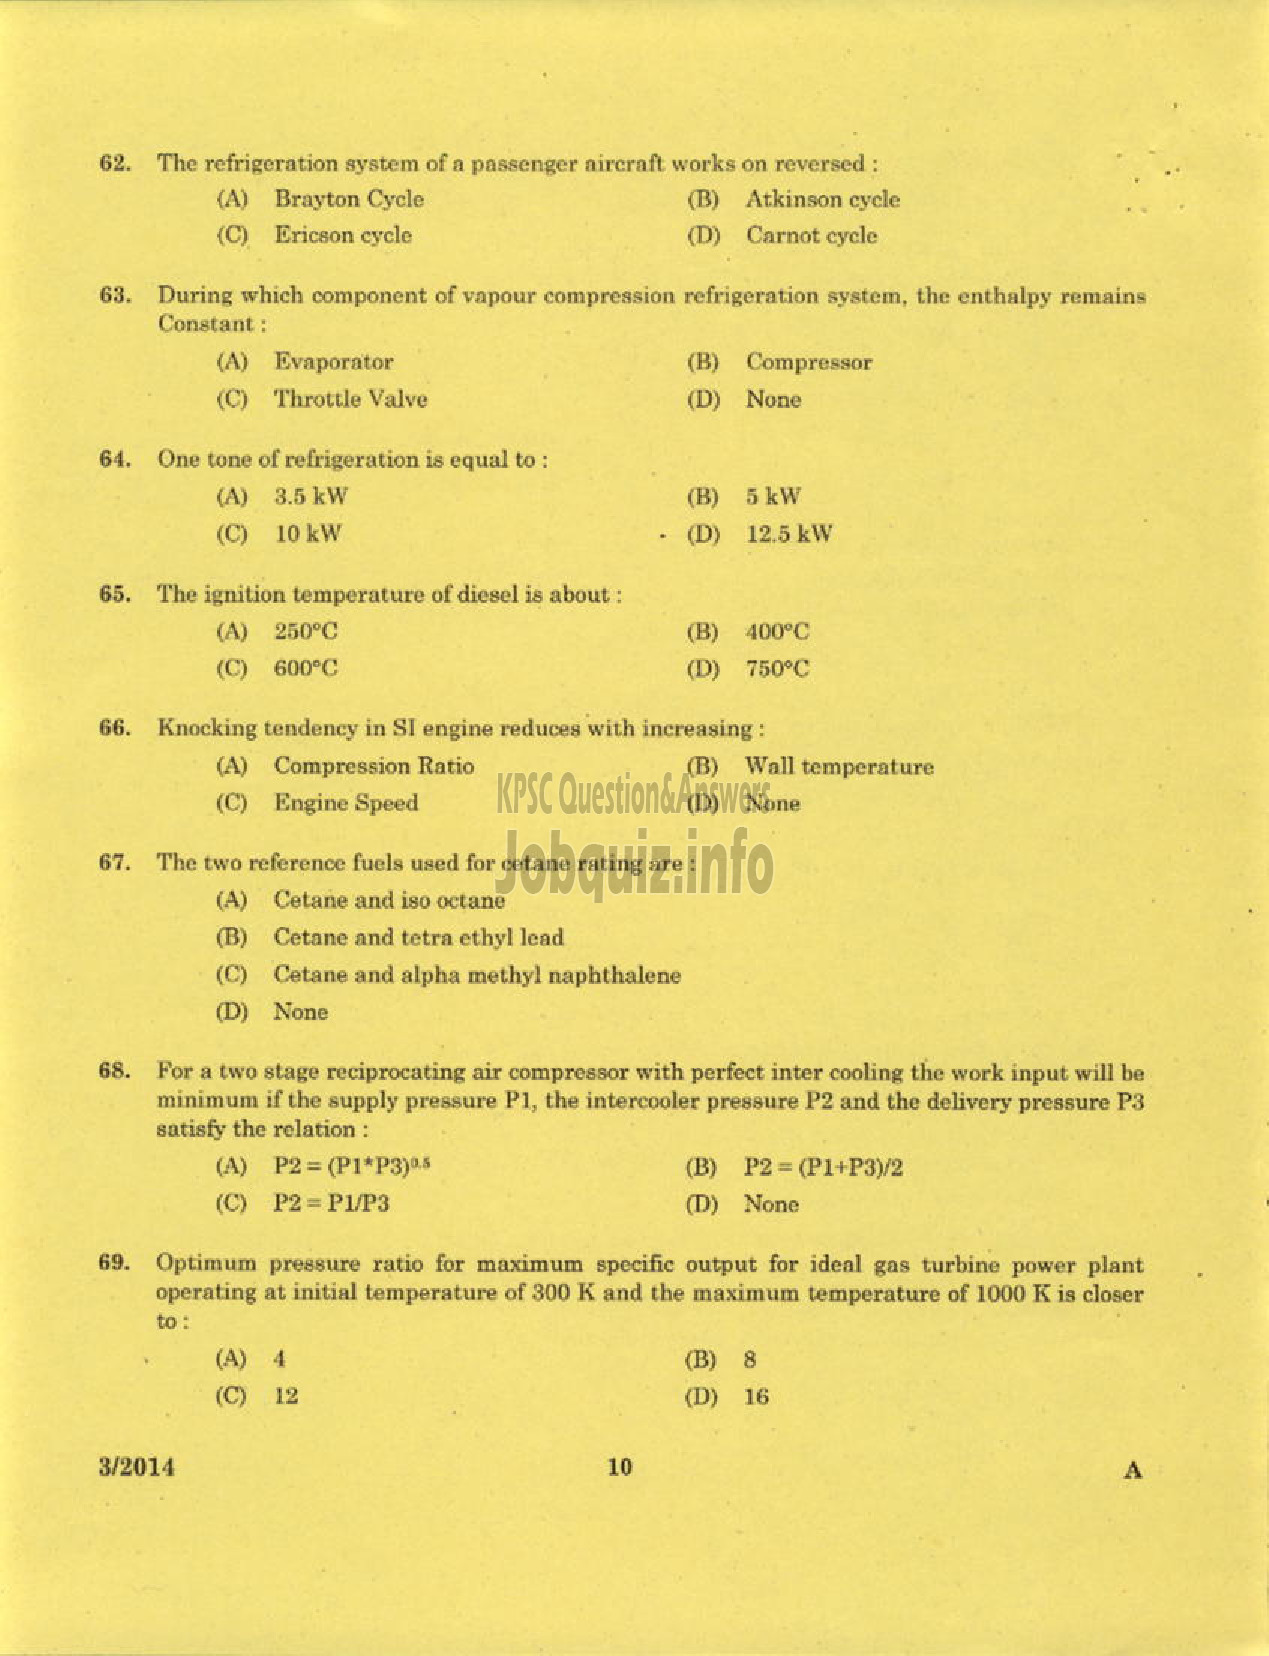 Kerala PSC Question Paper - LECTURER IN MACHANICAL ENGINEERING POLYTECHNICS TECHNICAL EDUCATION-8